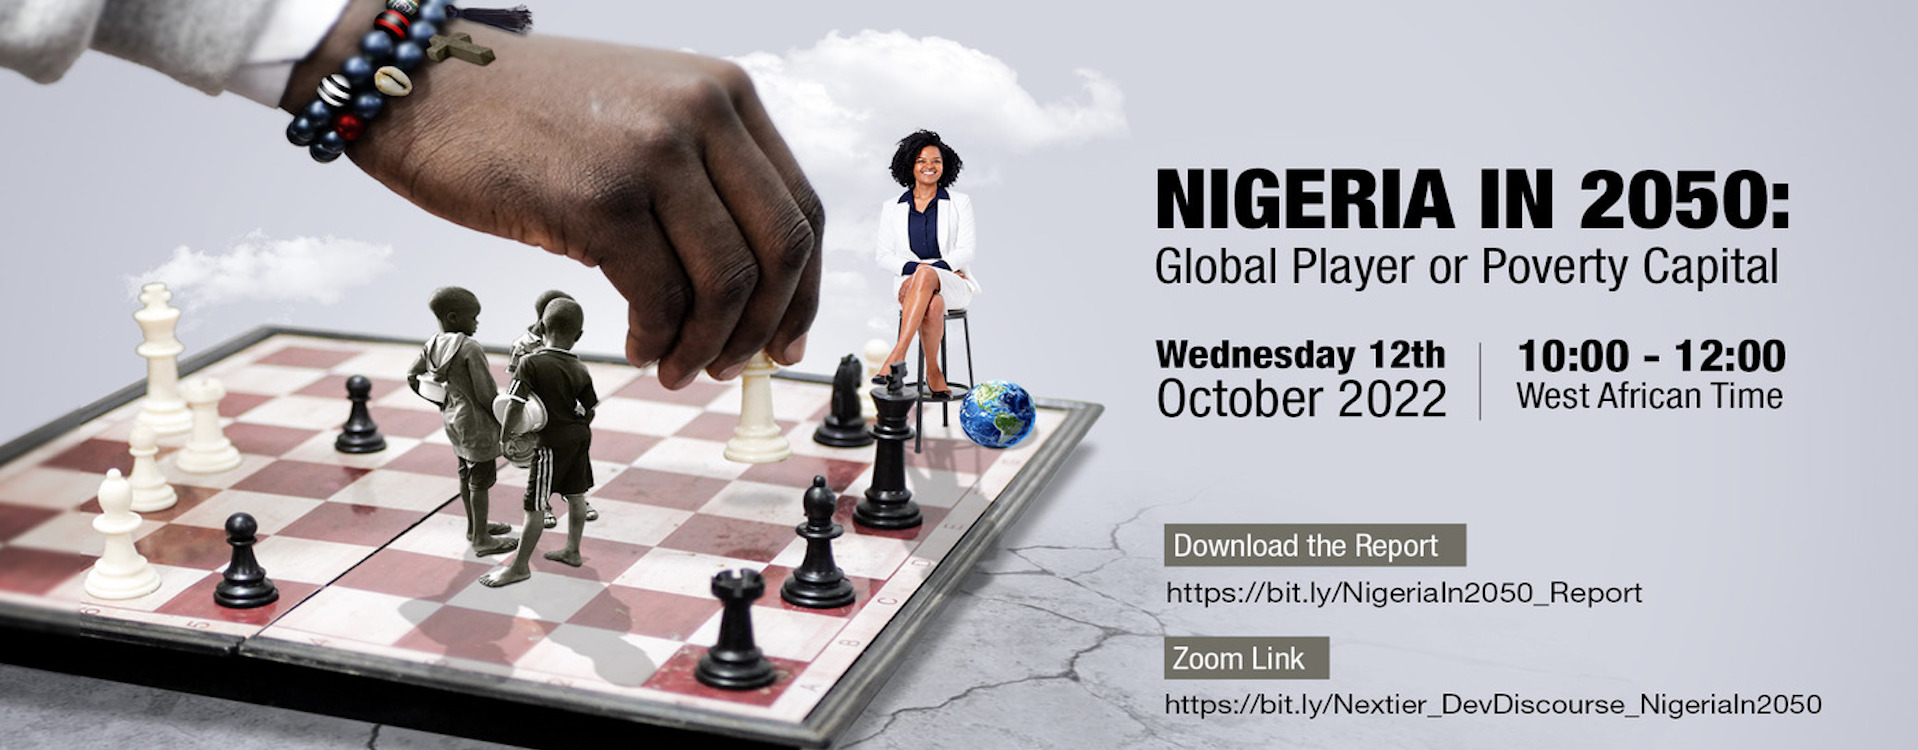 Nigeria in 2050: Global Player or Poverty Capital